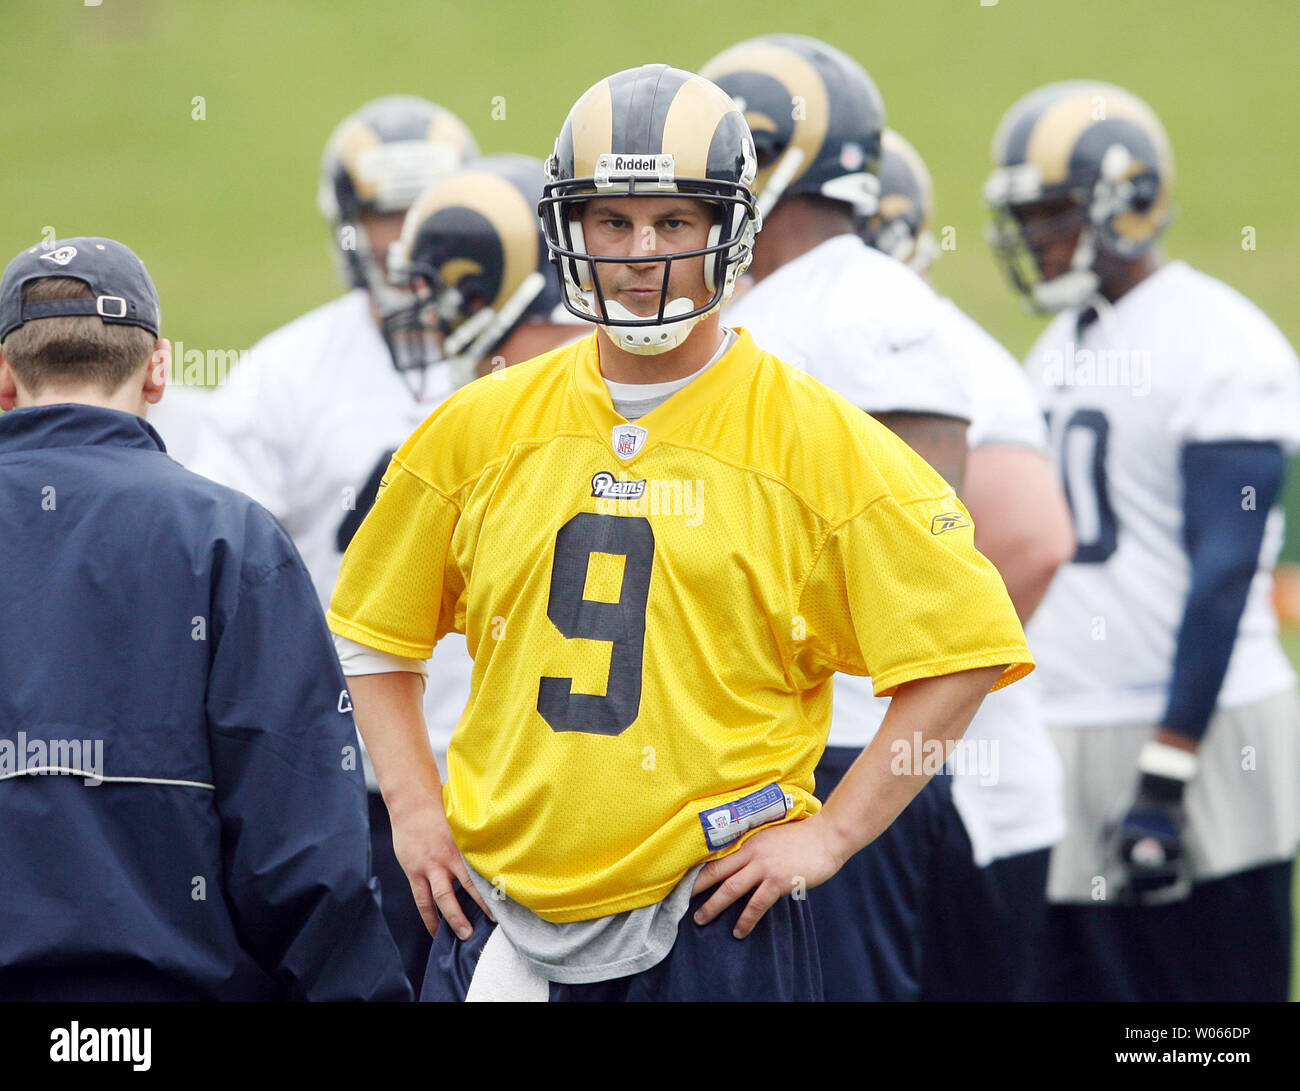 St. Louis Rams quarterback Jeff Smoker waits for a new play during a rookie minicamp at the Rams practice facility in Earth City, Mo on May 13, 2006. (UPI Photo/Bill Greenblatt) Stock Photo